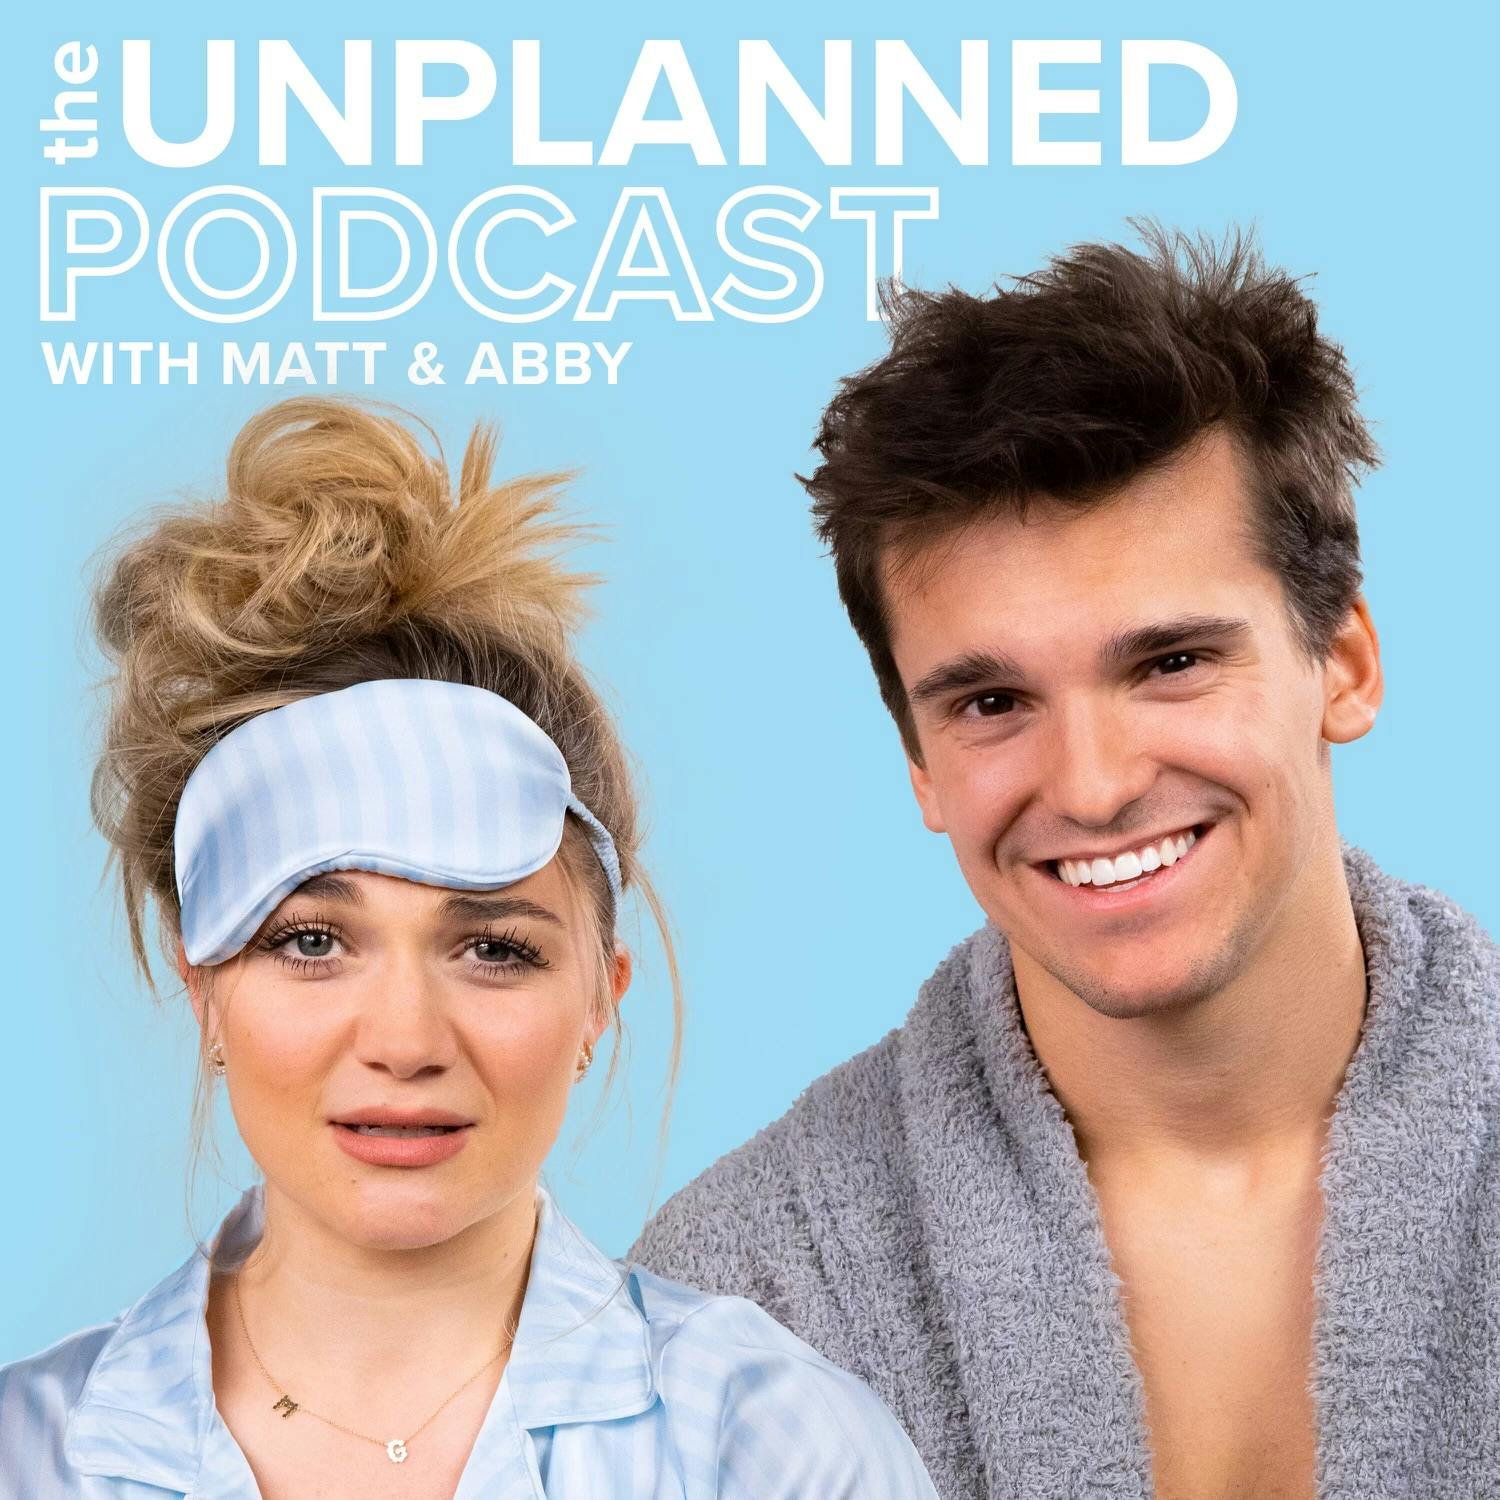 Devin & Hunter Cordle on Waiting Until Marriage, Postpartum Depression & Getting Hate Online by Matt & Abby